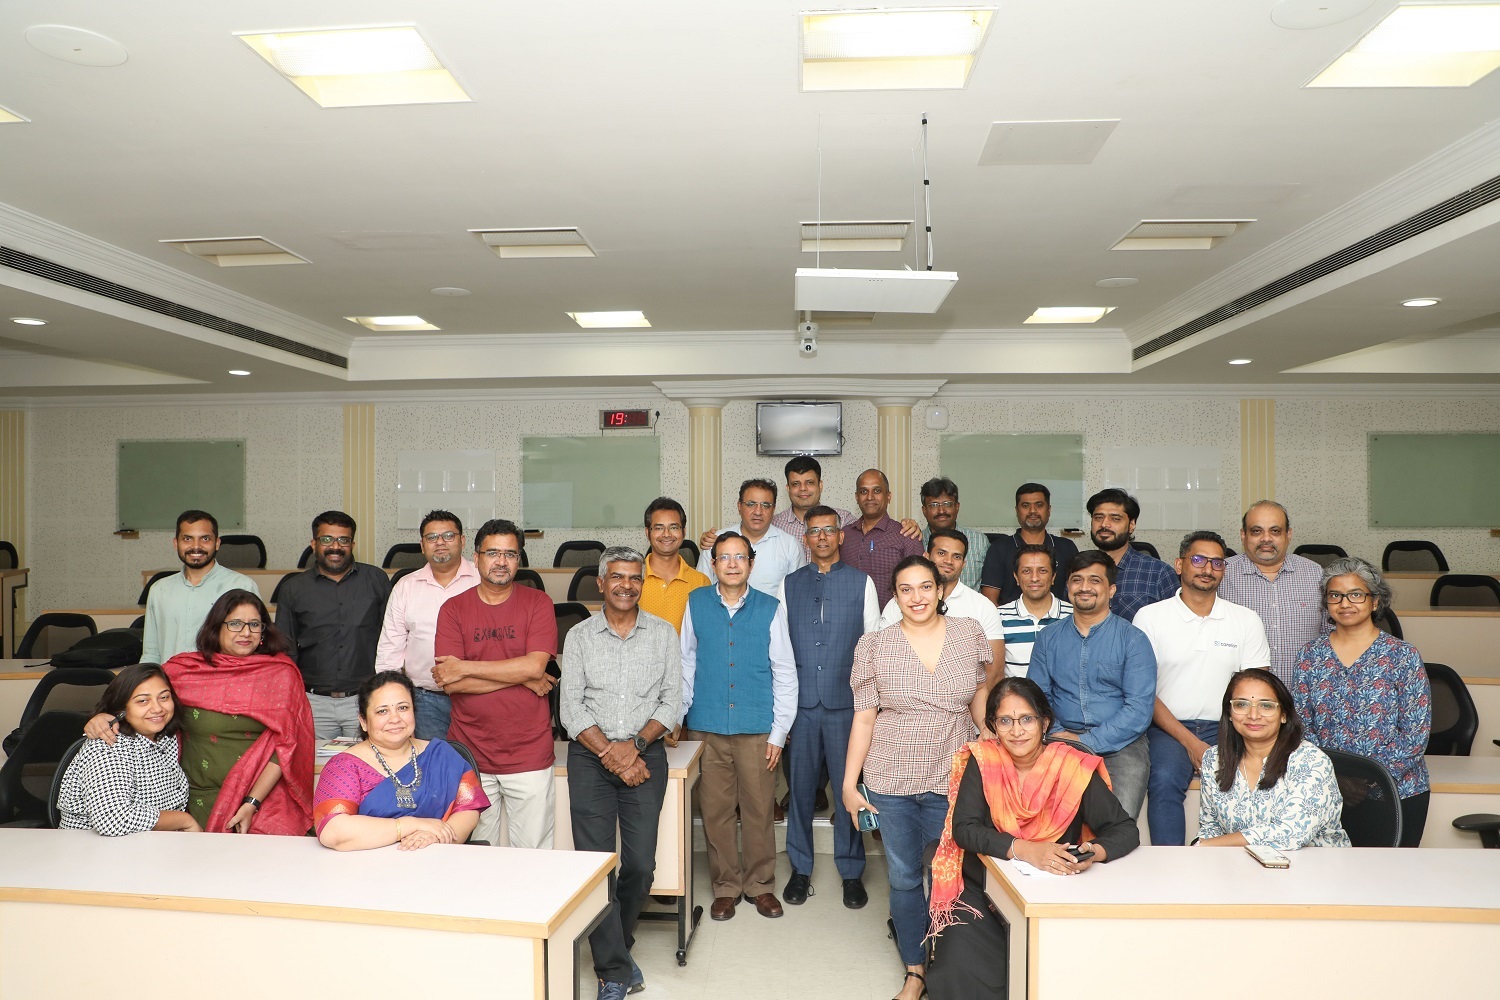 The Office of Executive Education Programmes at IIM Bangalore hosted a Guest Speaker Session on 11th July 2023 for the ELT Leadership Development Programme for Carelon Global Solutions India LLP. The session was led by Dr. Amrut S Kadam, Professor and Head of Radiation Oncology, Bangalore Medical College and Research Institute.